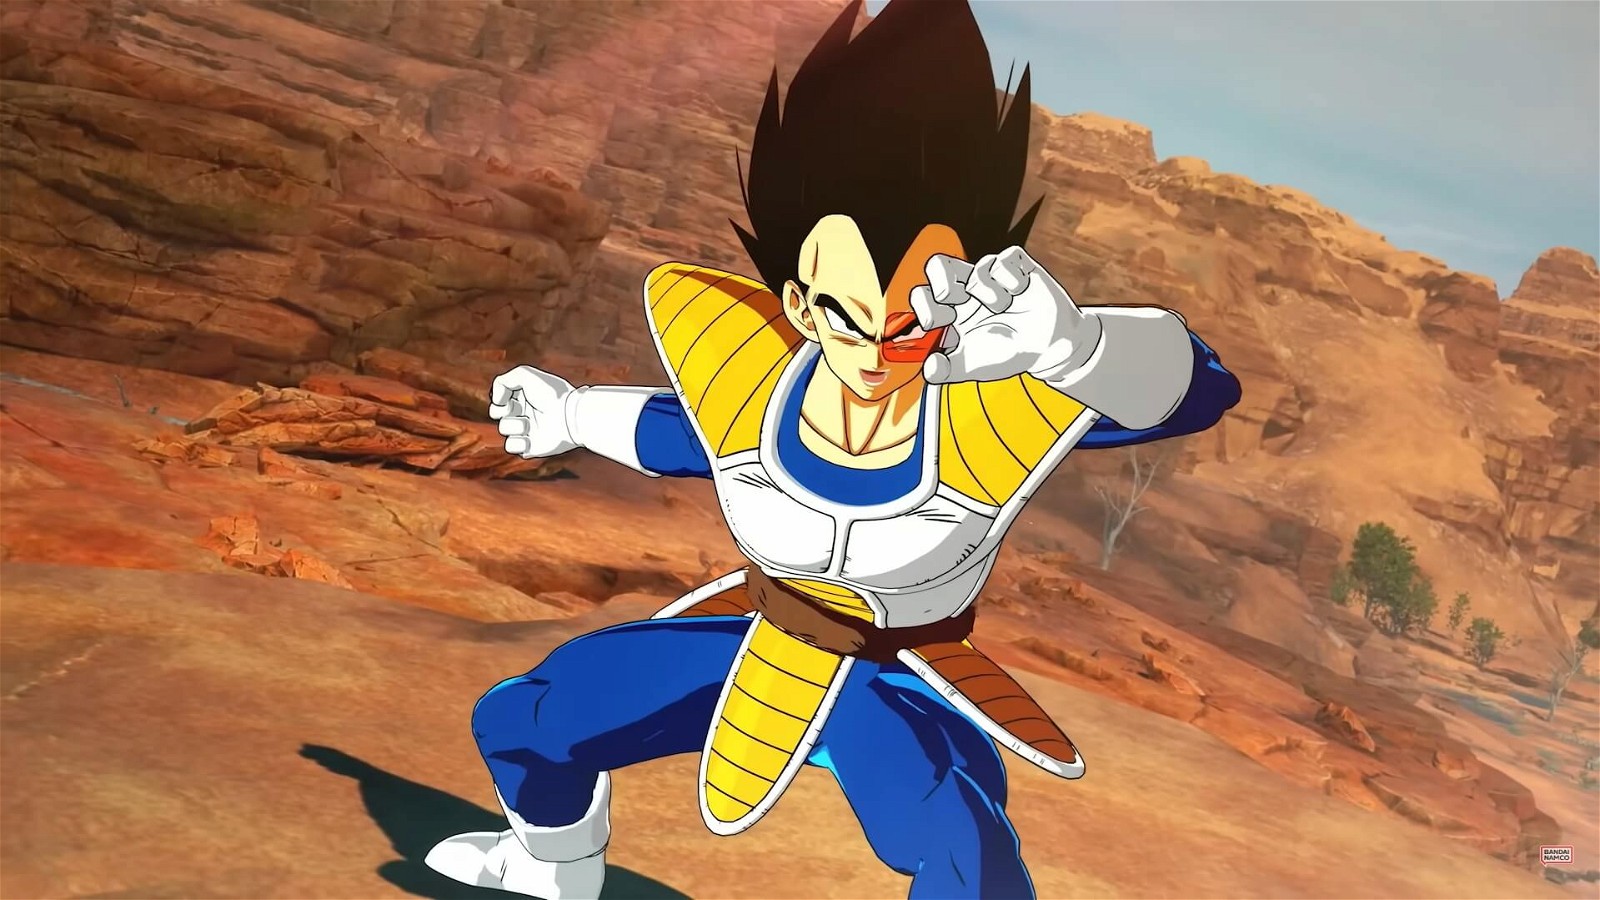 Scouter Vegeta with a tail in Dragon Ball: Sparking Zero. Credits: Bandai Namco